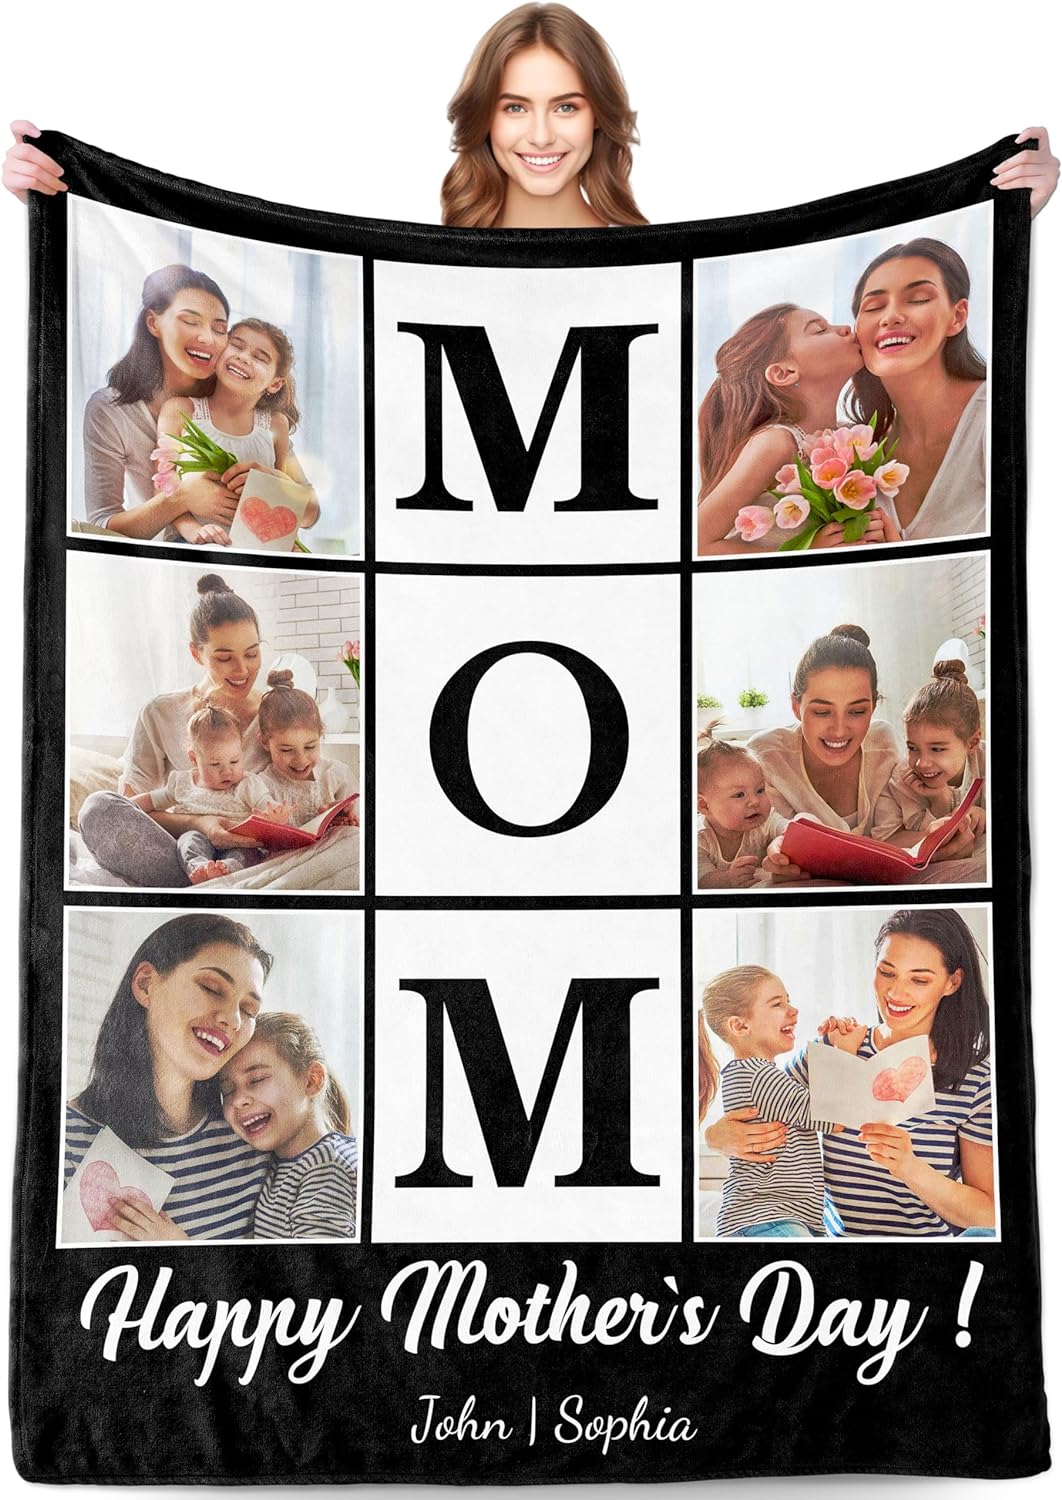 AISENIN Personalized Mothers Day Birthday Gifts for Mom Custom Photo Blanket Customized Picture Collage Text Blanket, Mom Gifts from Daughter Son Kids Husband, Valentines for Mom